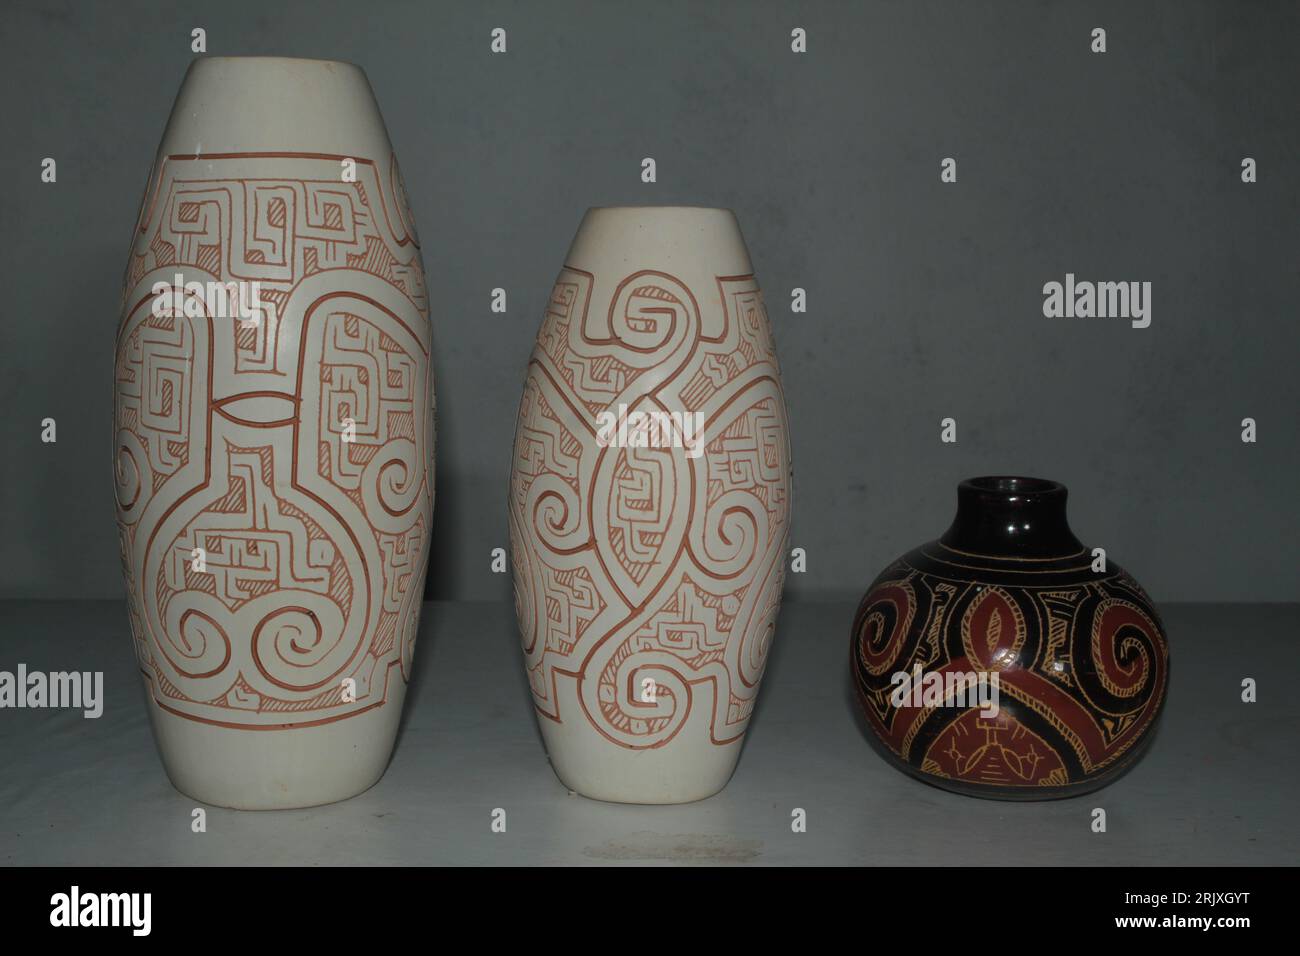 Handcrafted vases of indigenous pottery from the Brazilian Amazon, pottery from Icoaraçi, Belém, state of Pará, in the north of Brazil, South America. Stock Photo